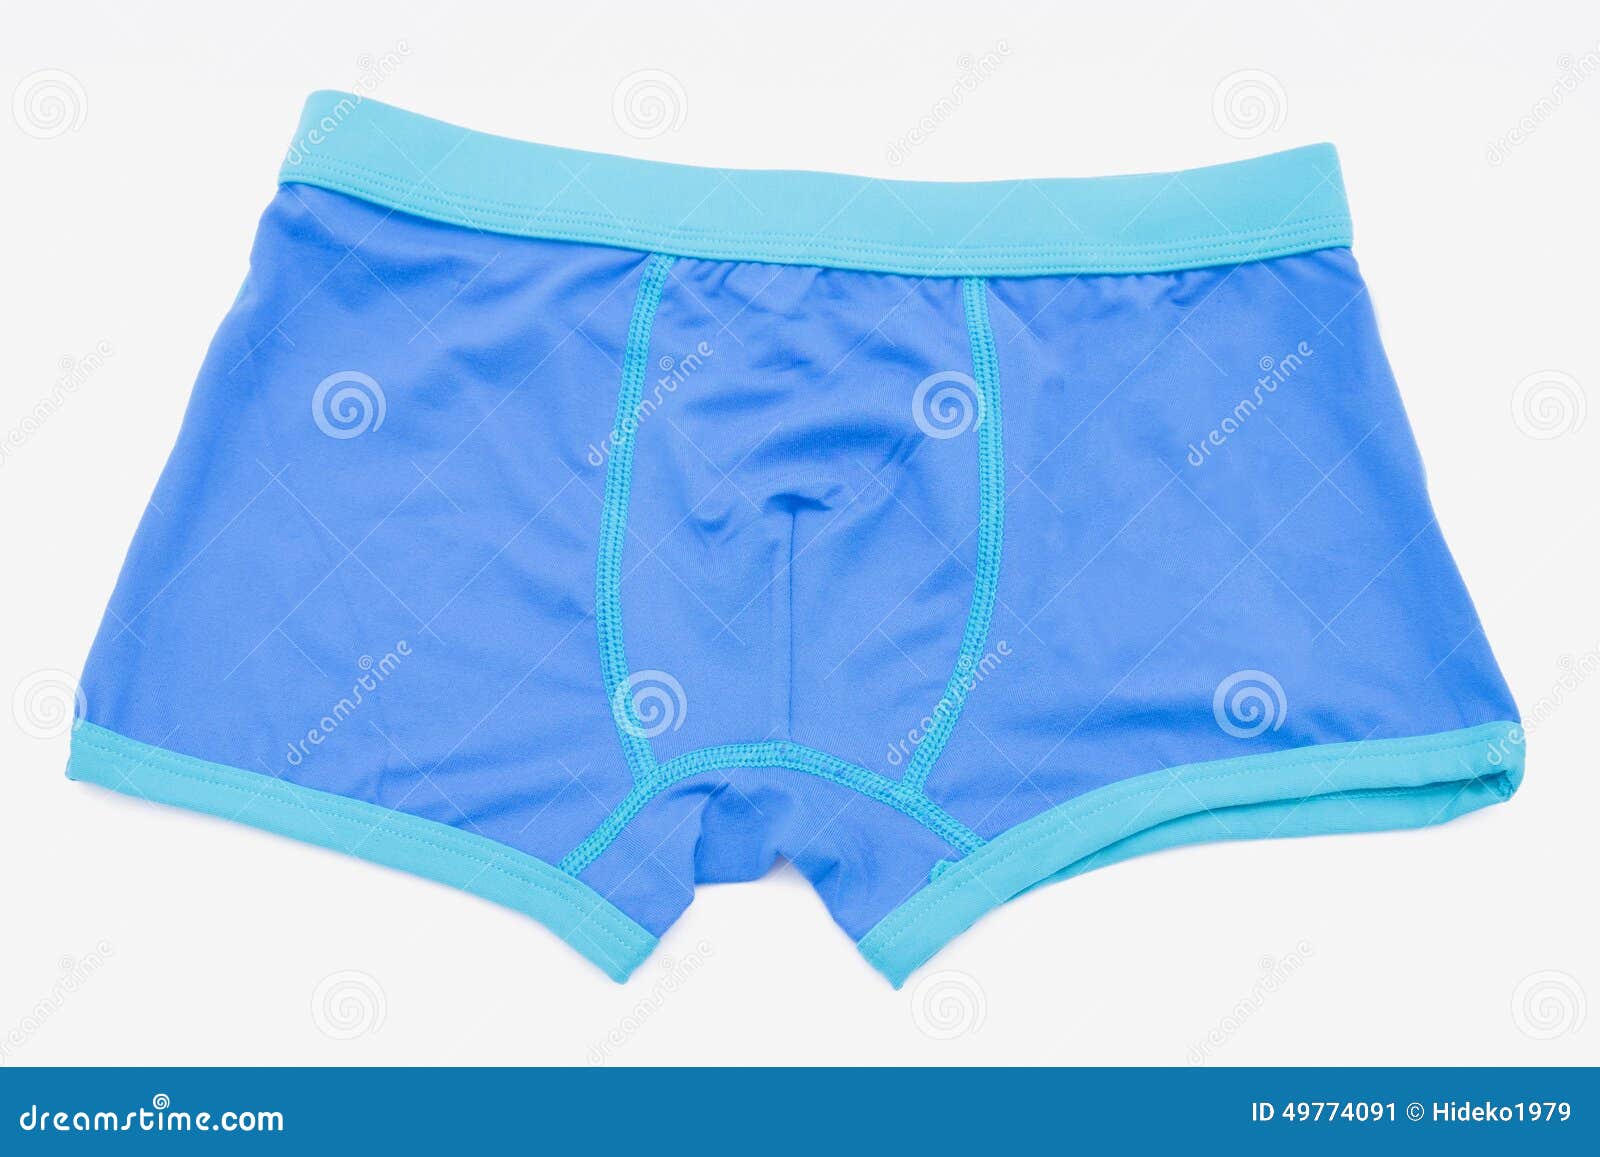 Children S Blue Swimming Shorts Isolated on White Background. Stock ...